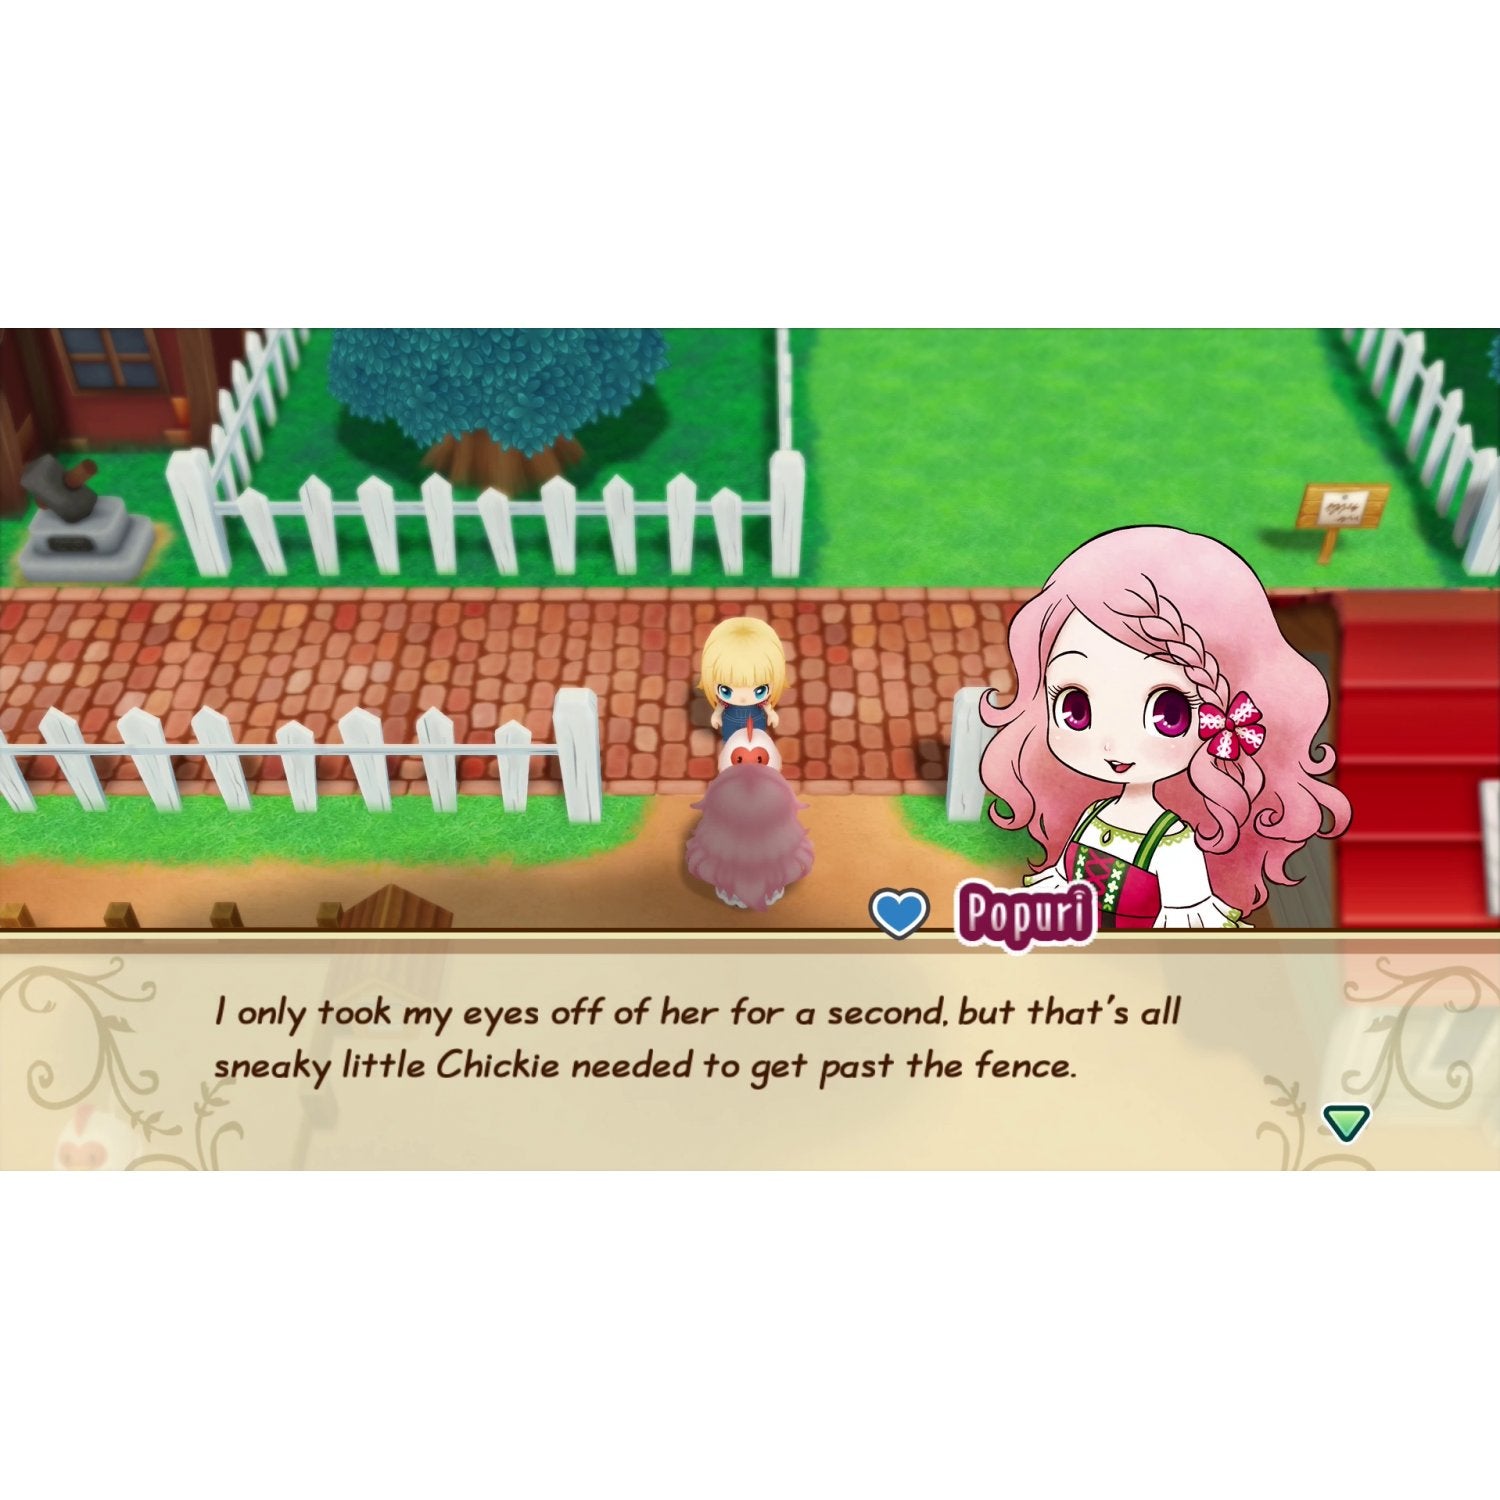 NSW Story of Seasons: Friends of Mineral Town